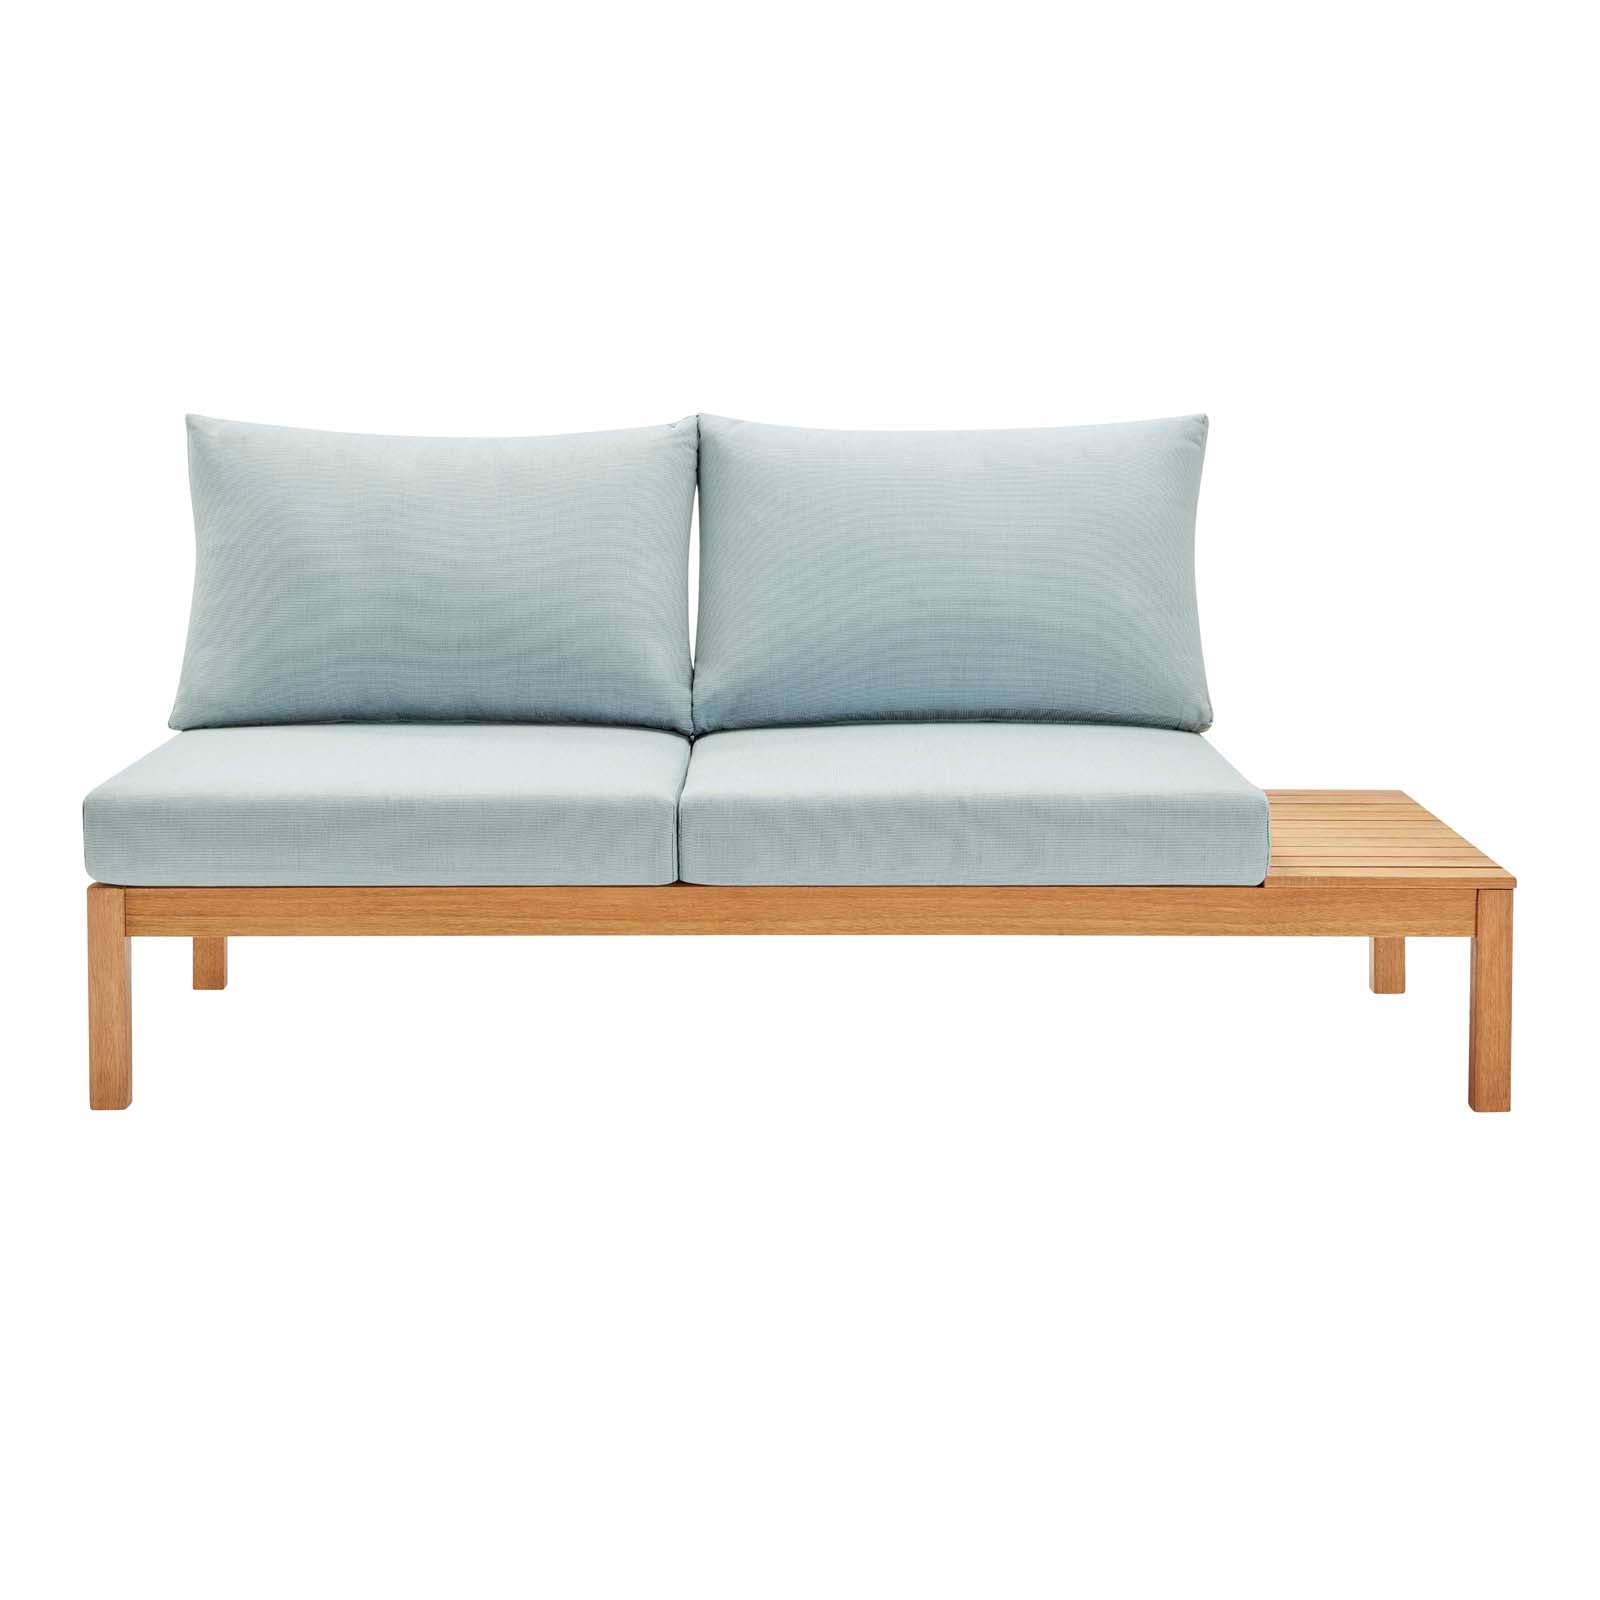 Modway Outdoor Sofas - Freeport Karri Outdoor Patio Loveseat with End Table Natural Light Blue